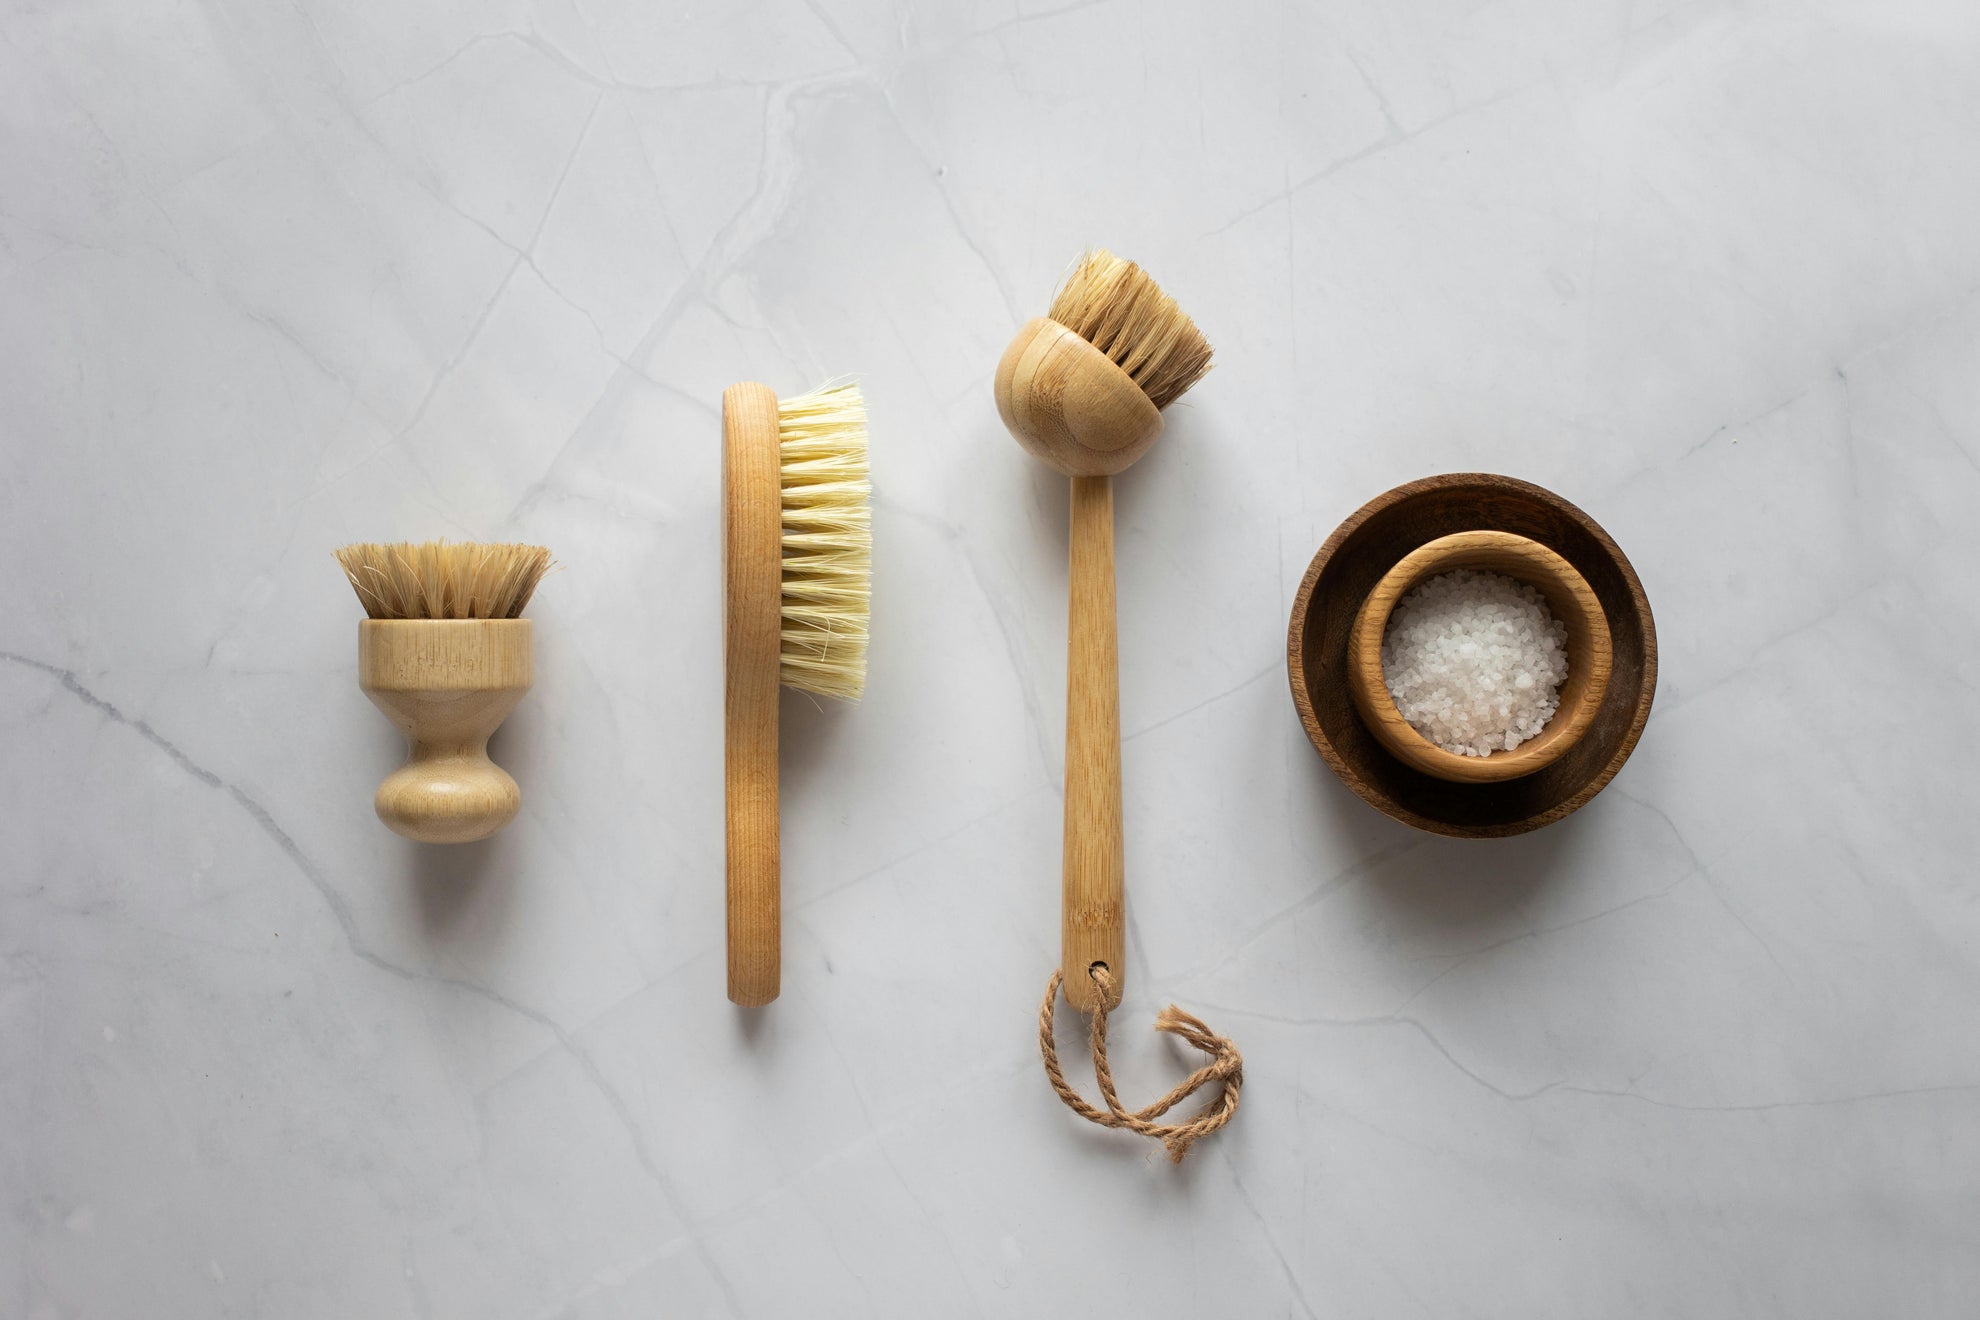 What Is Dry Brushing?